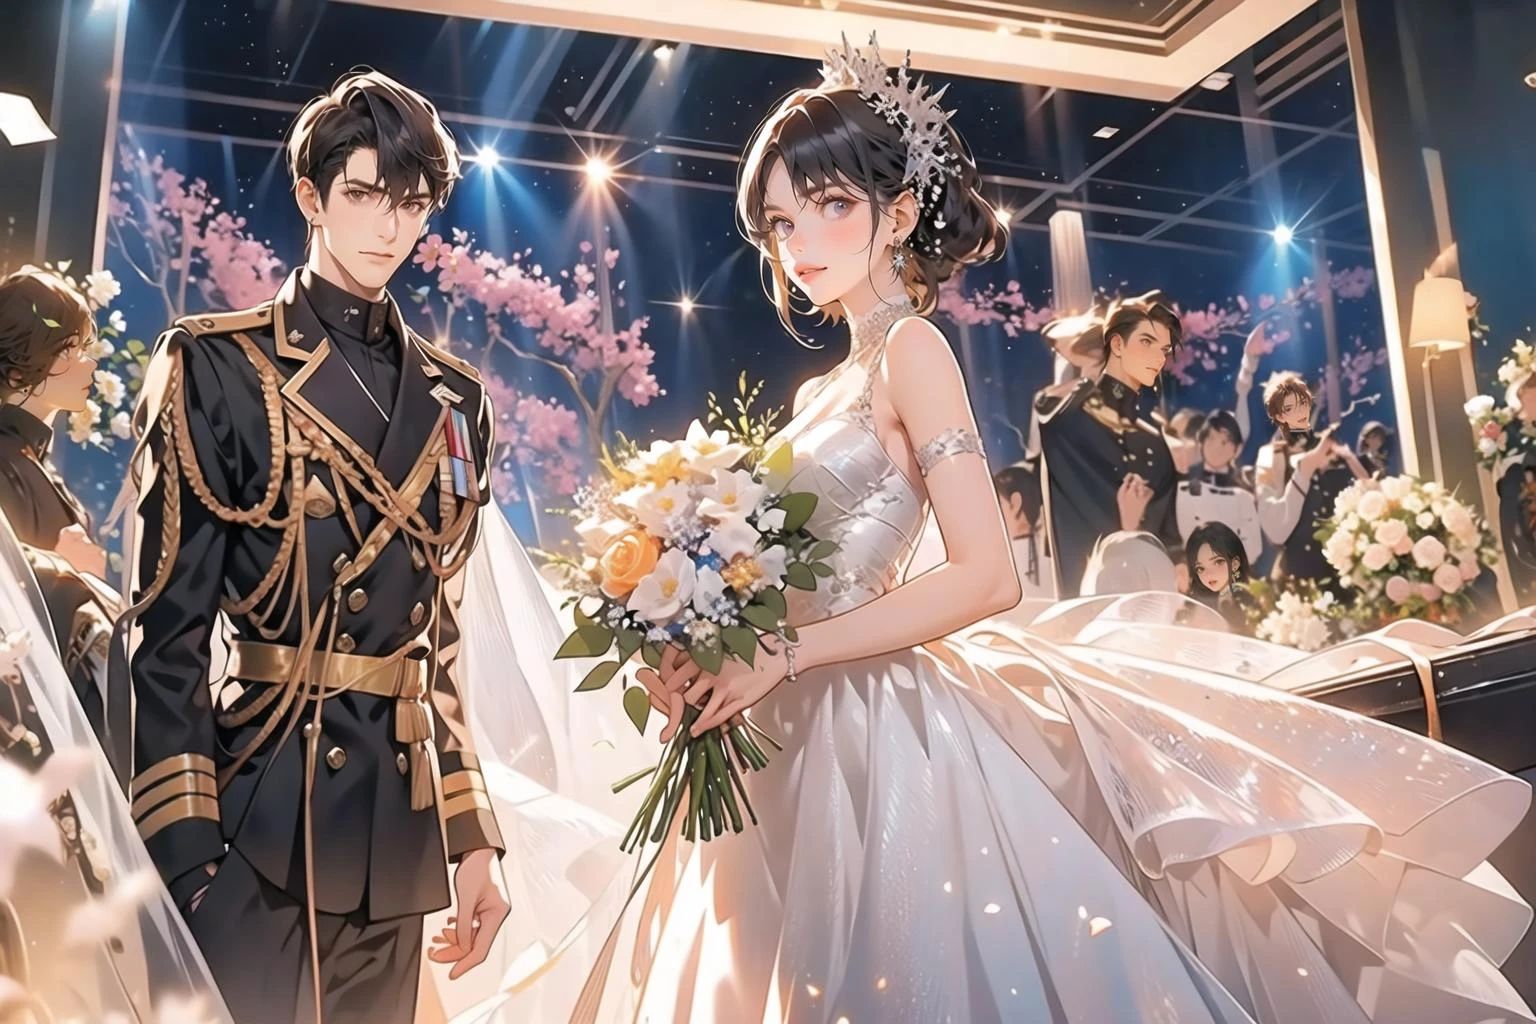 (masterpiece:1.2),(masterpiece, top quality, best quality),highres,original,dynamic pose,
1 girl, 1 boy, flowers, black hair, evening gown, dress, military uniform, military uniform, bouquet, long hair, hair accessories, earrings, military uniform, shirt, holding bouquet, white flower, holding, straight, white shirt, pink flower, looking at the audience, short hair
